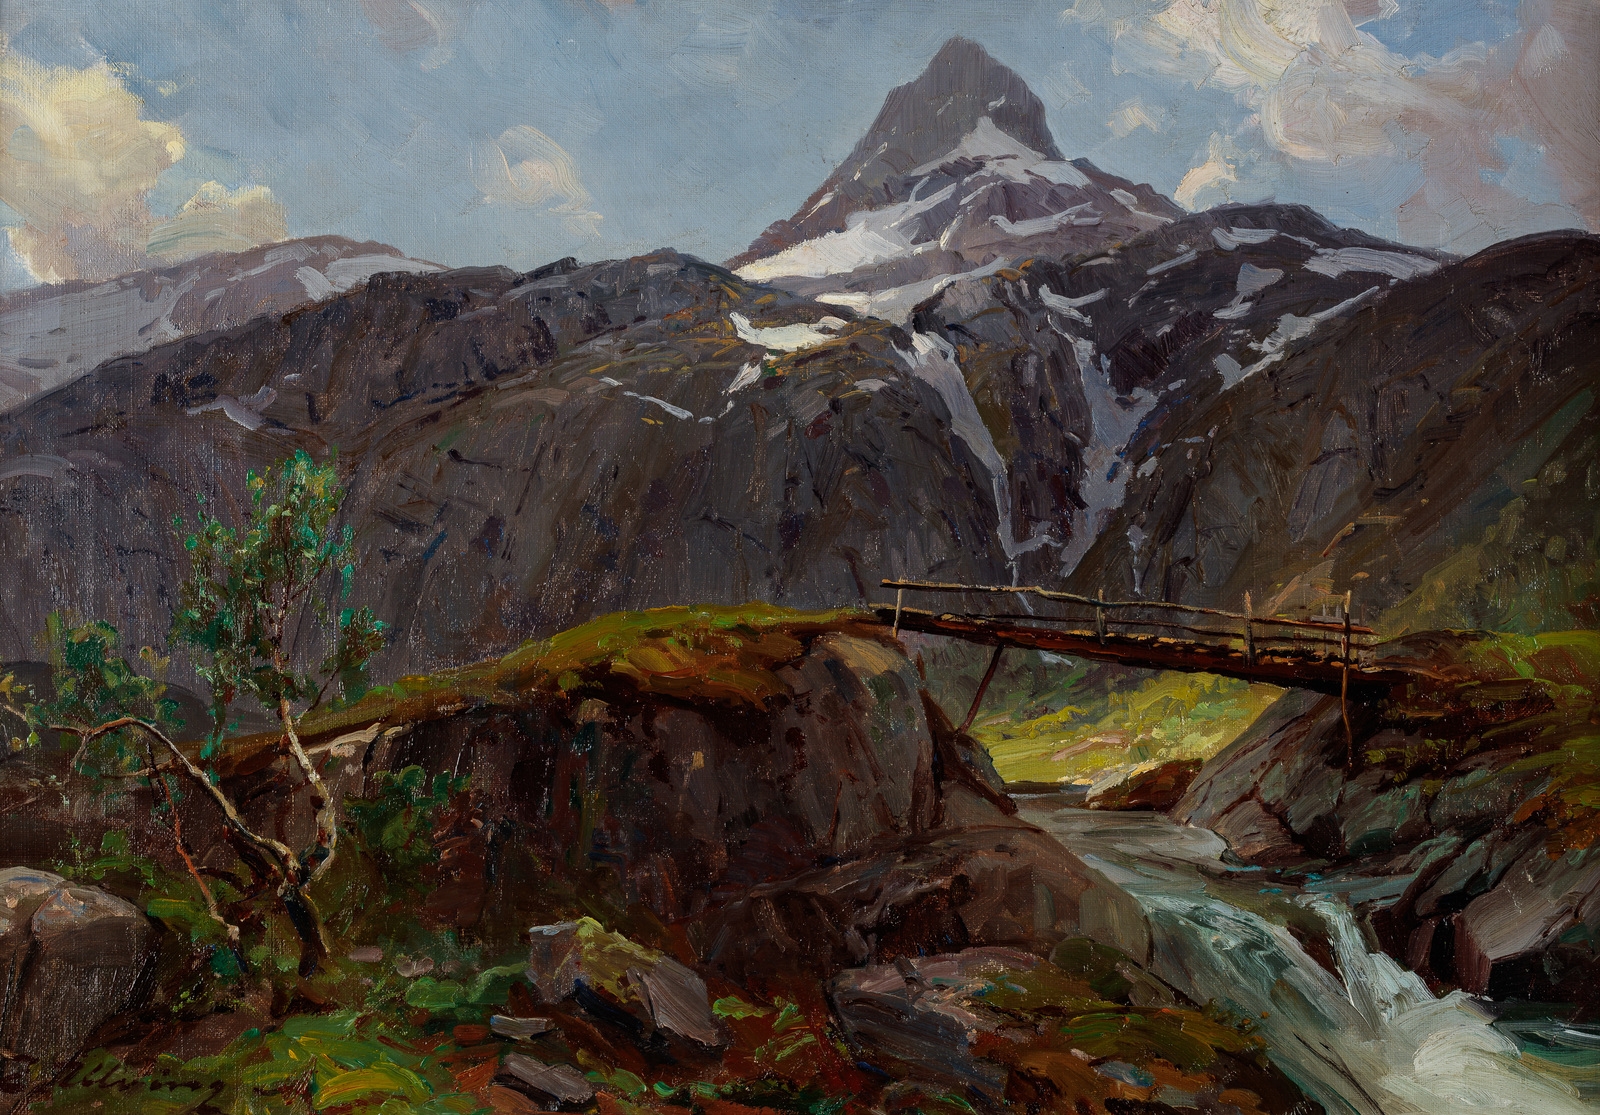 Artwork by Even Ulving, Fra Verma i Romsdalen, Made of oil on canvas